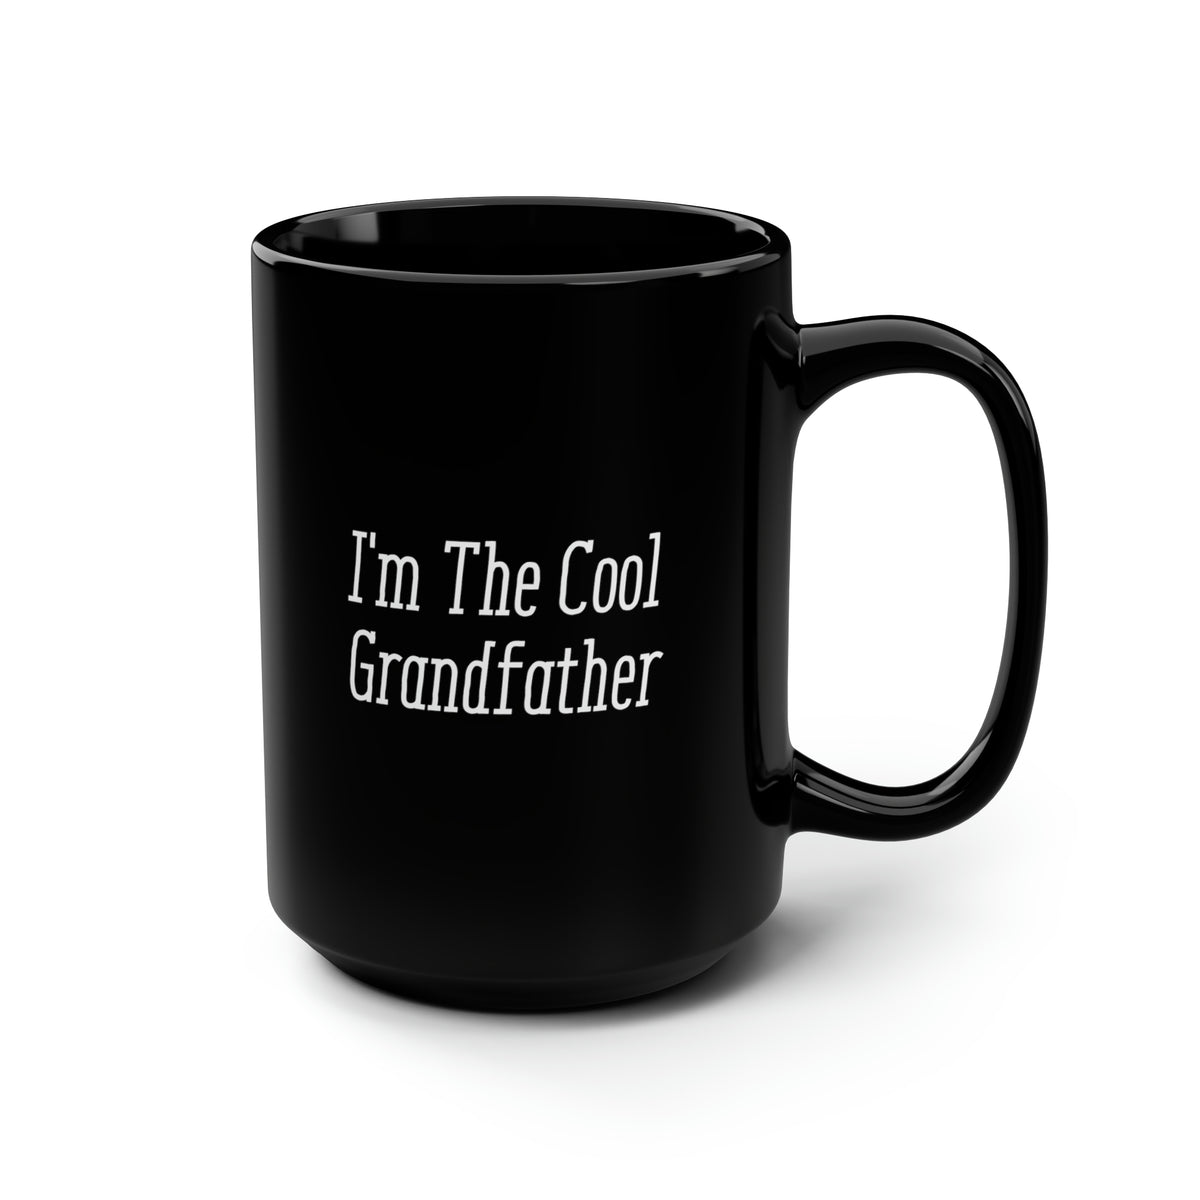 Funny Grandfather 15oz Mug, I'm The Cool Grandfather, Motivational Gifts for Granddaddy from Grandson, father Gifts, Grandfather gift ideas for birthday, Grandfather gift ideas for